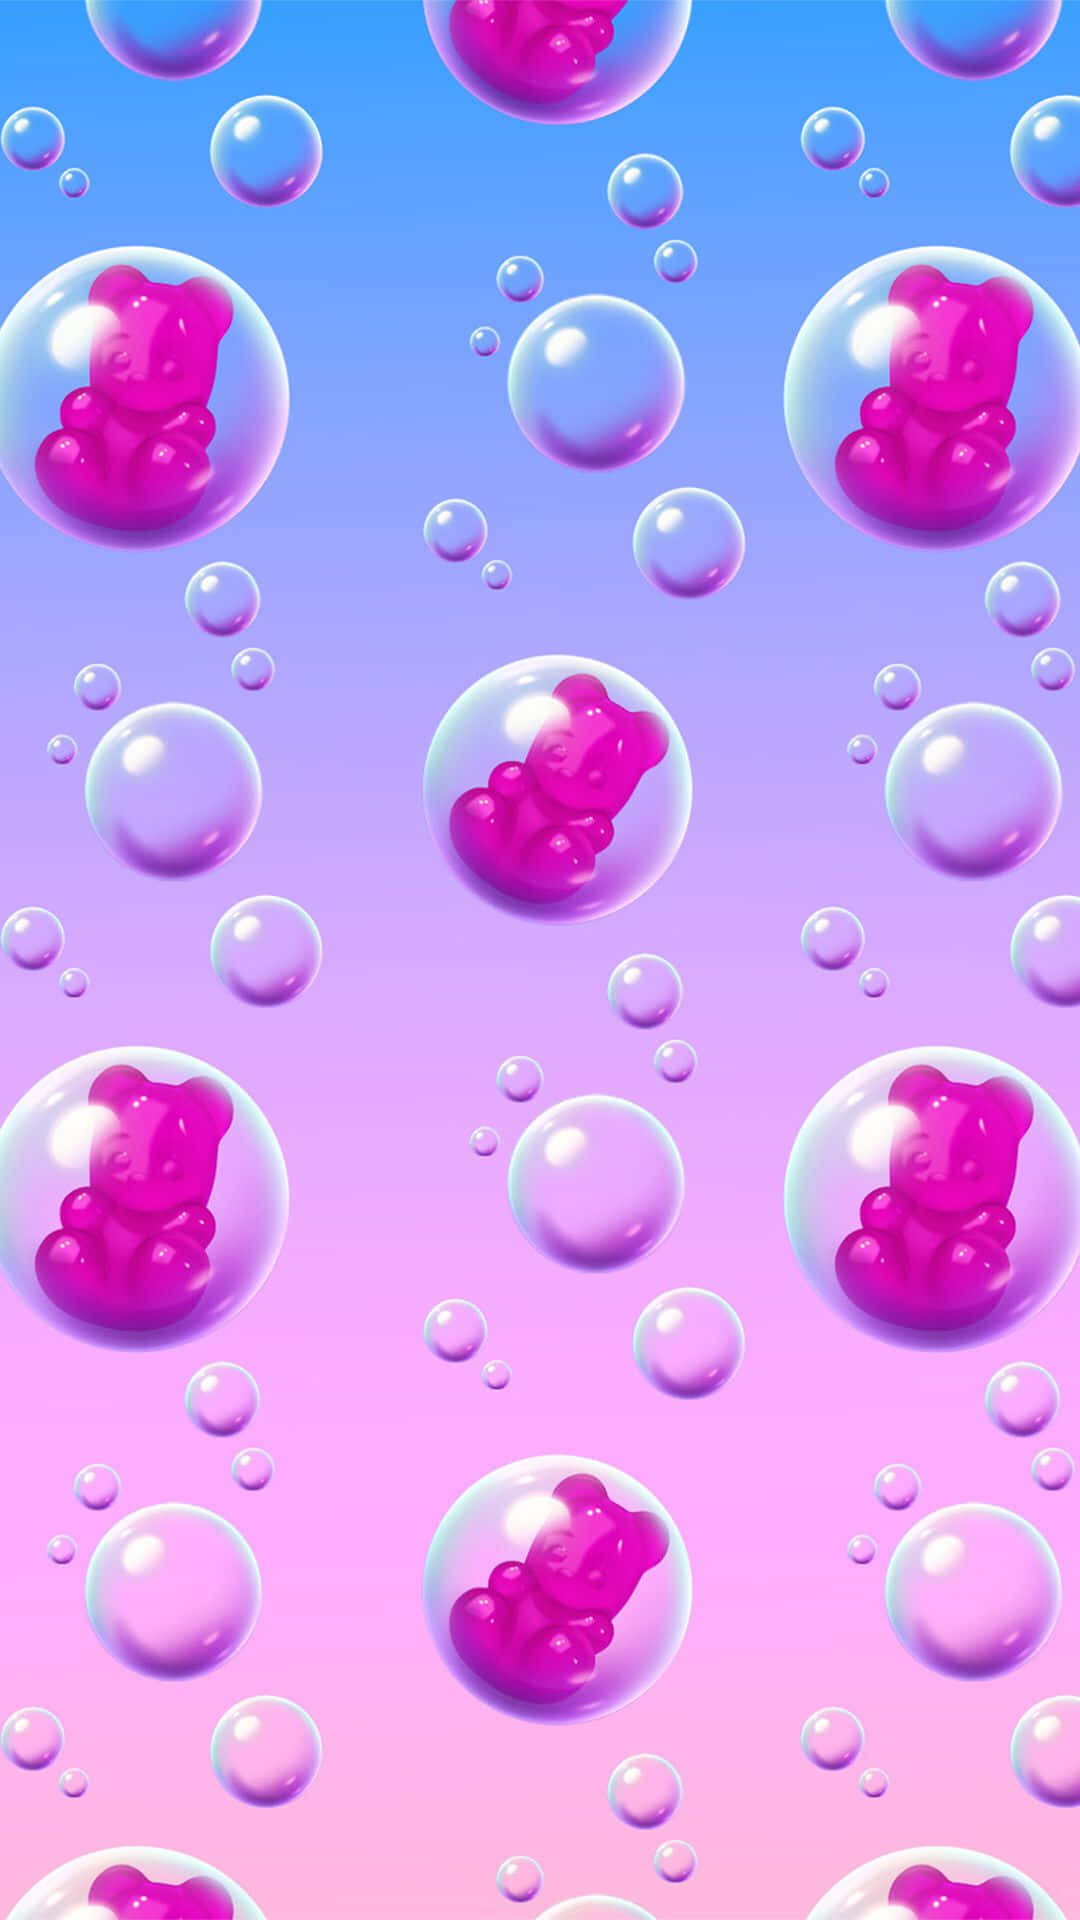 Download Bubbles On A Pink And Blue Background Wallpaper | Wallpapers.com